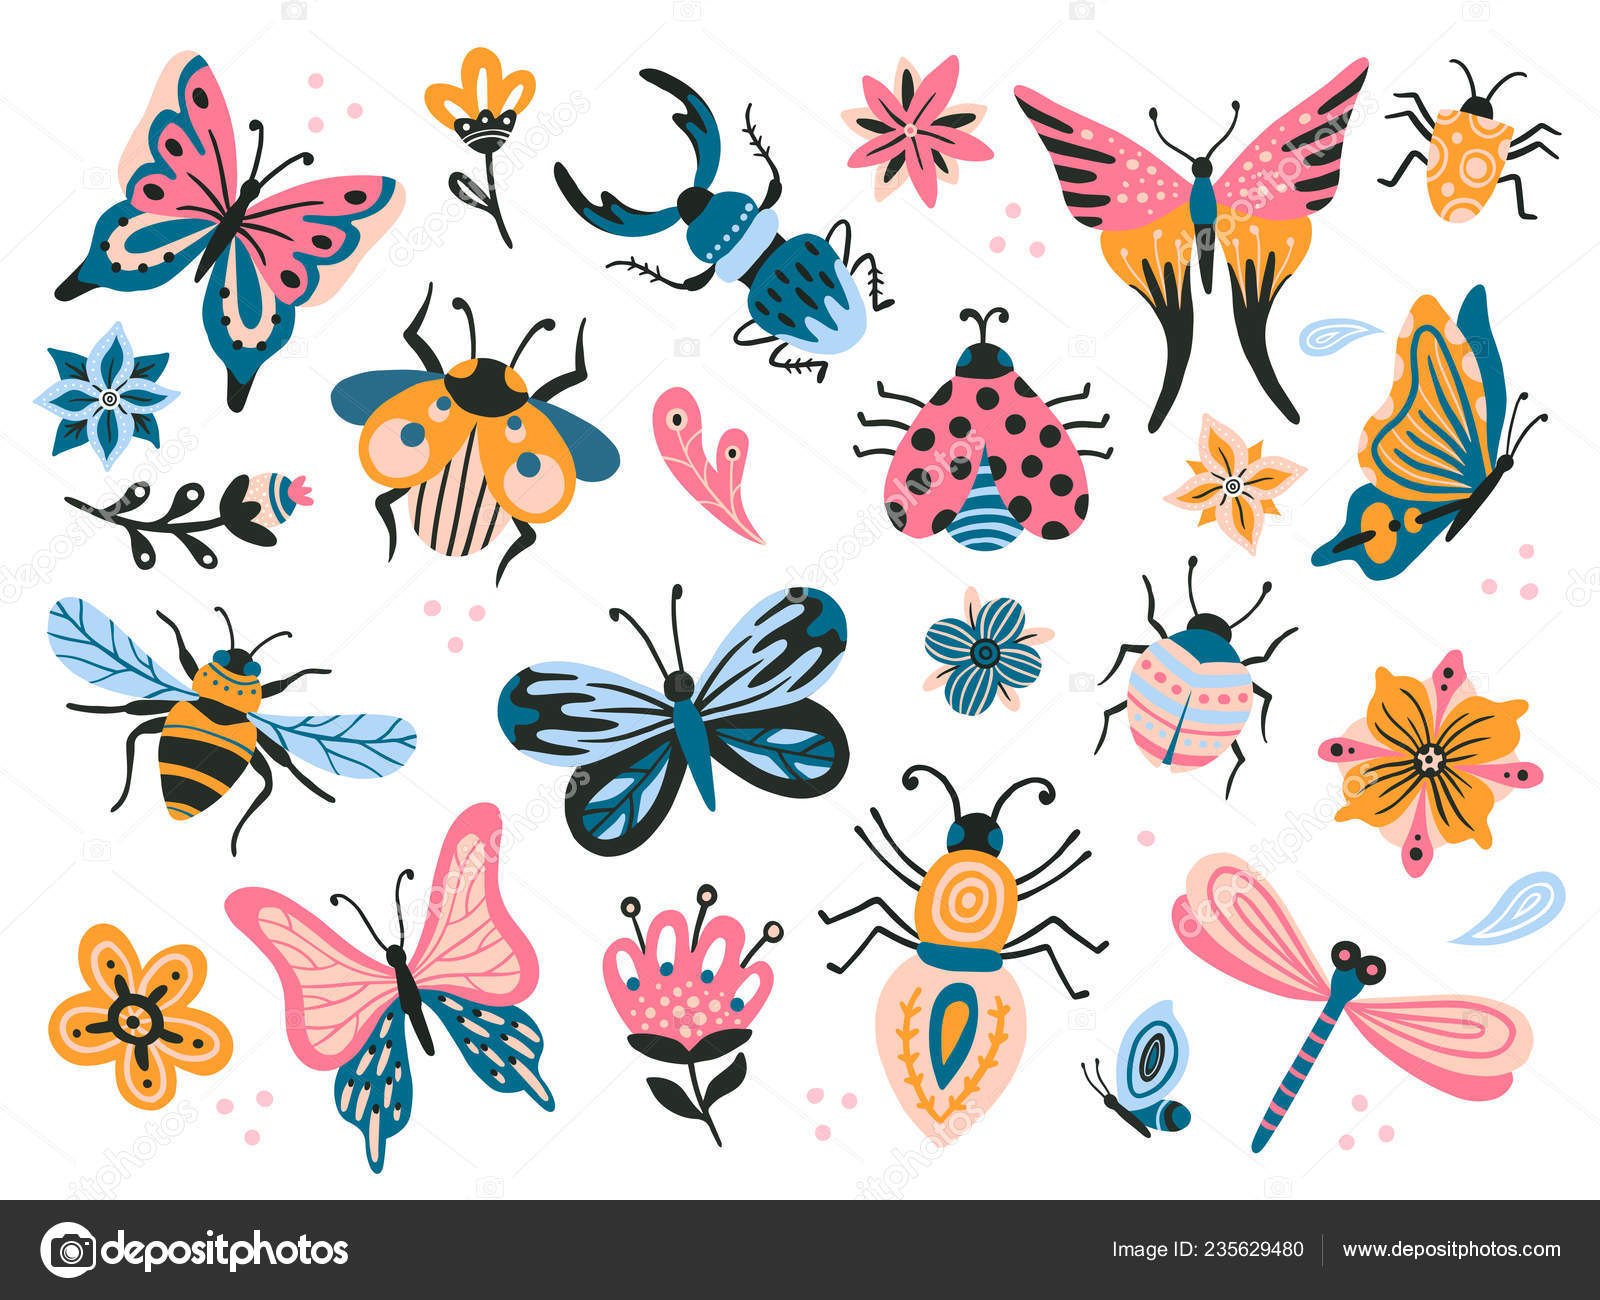 Insects Picture For Drawing - HD Wallpaper 